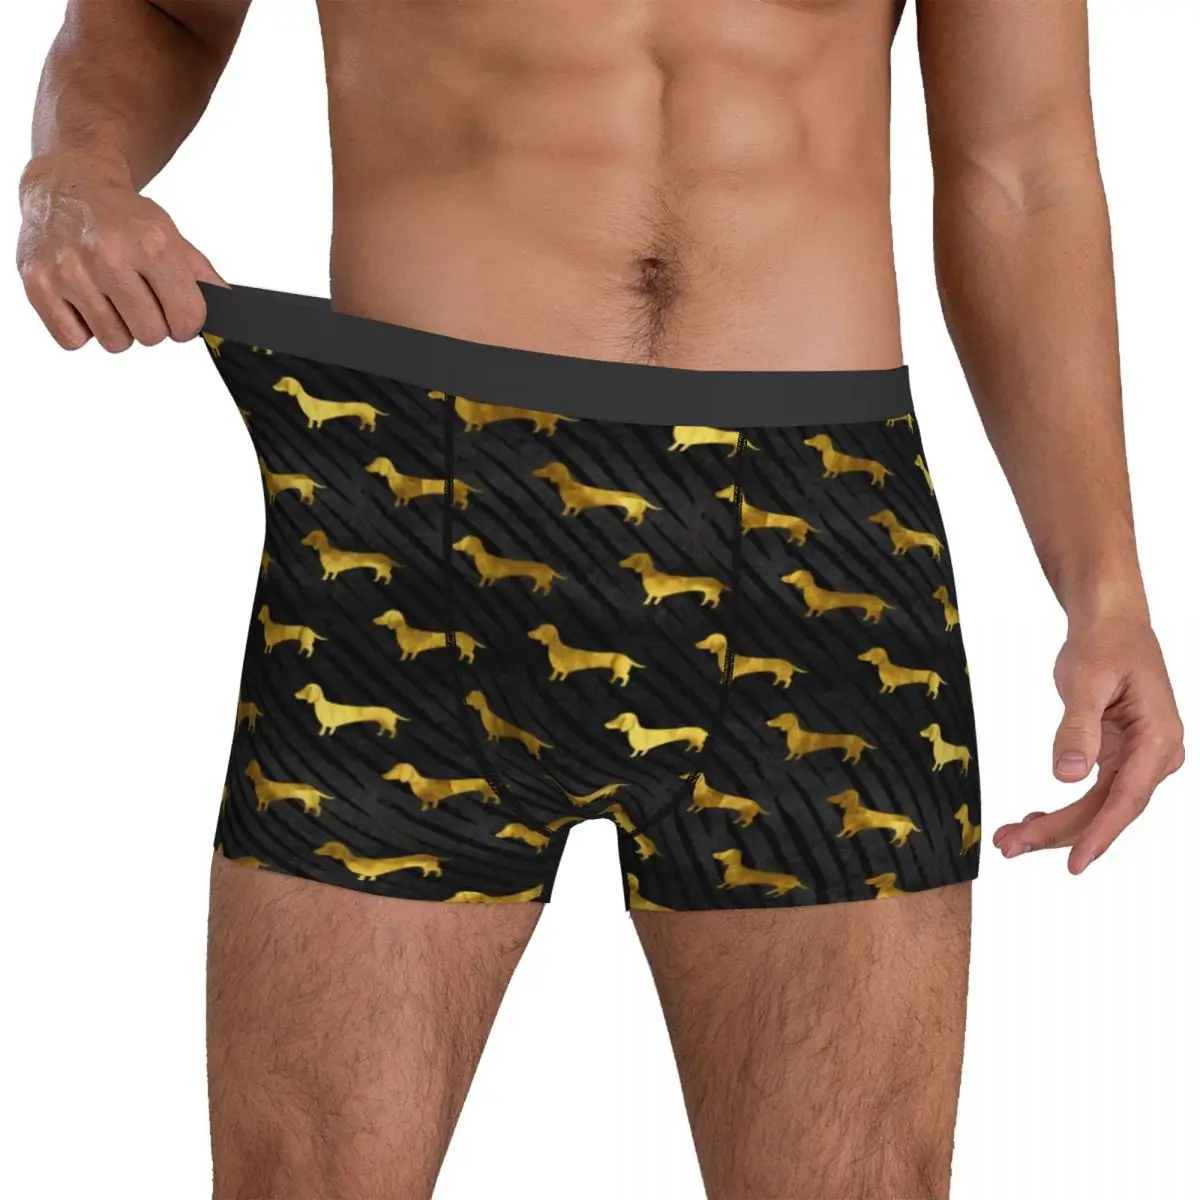 

Dachshund Underwear Black and Gold Dog Funny Underpants Print Boxer Brief 3D Pouch Males Large Size Boxershorts